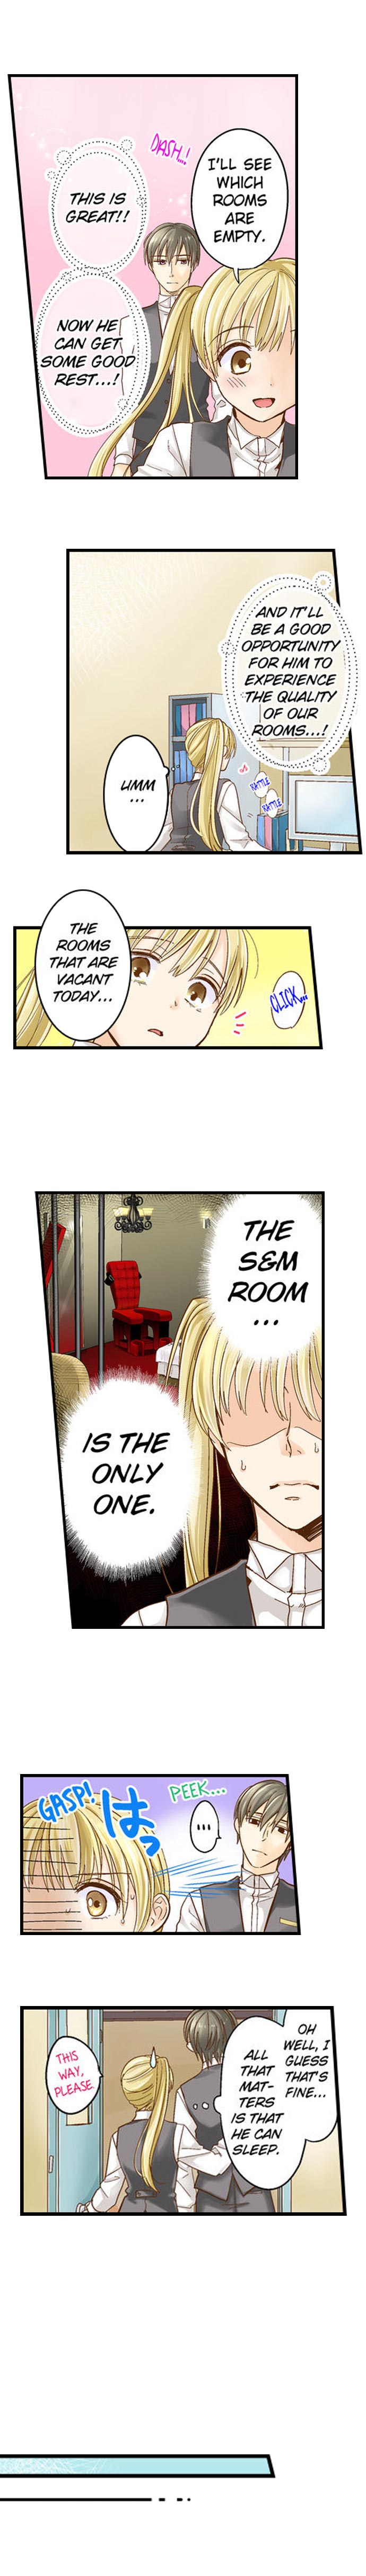 Running a Love Hotel with My Math Teacher - Chapter 37 Page 4